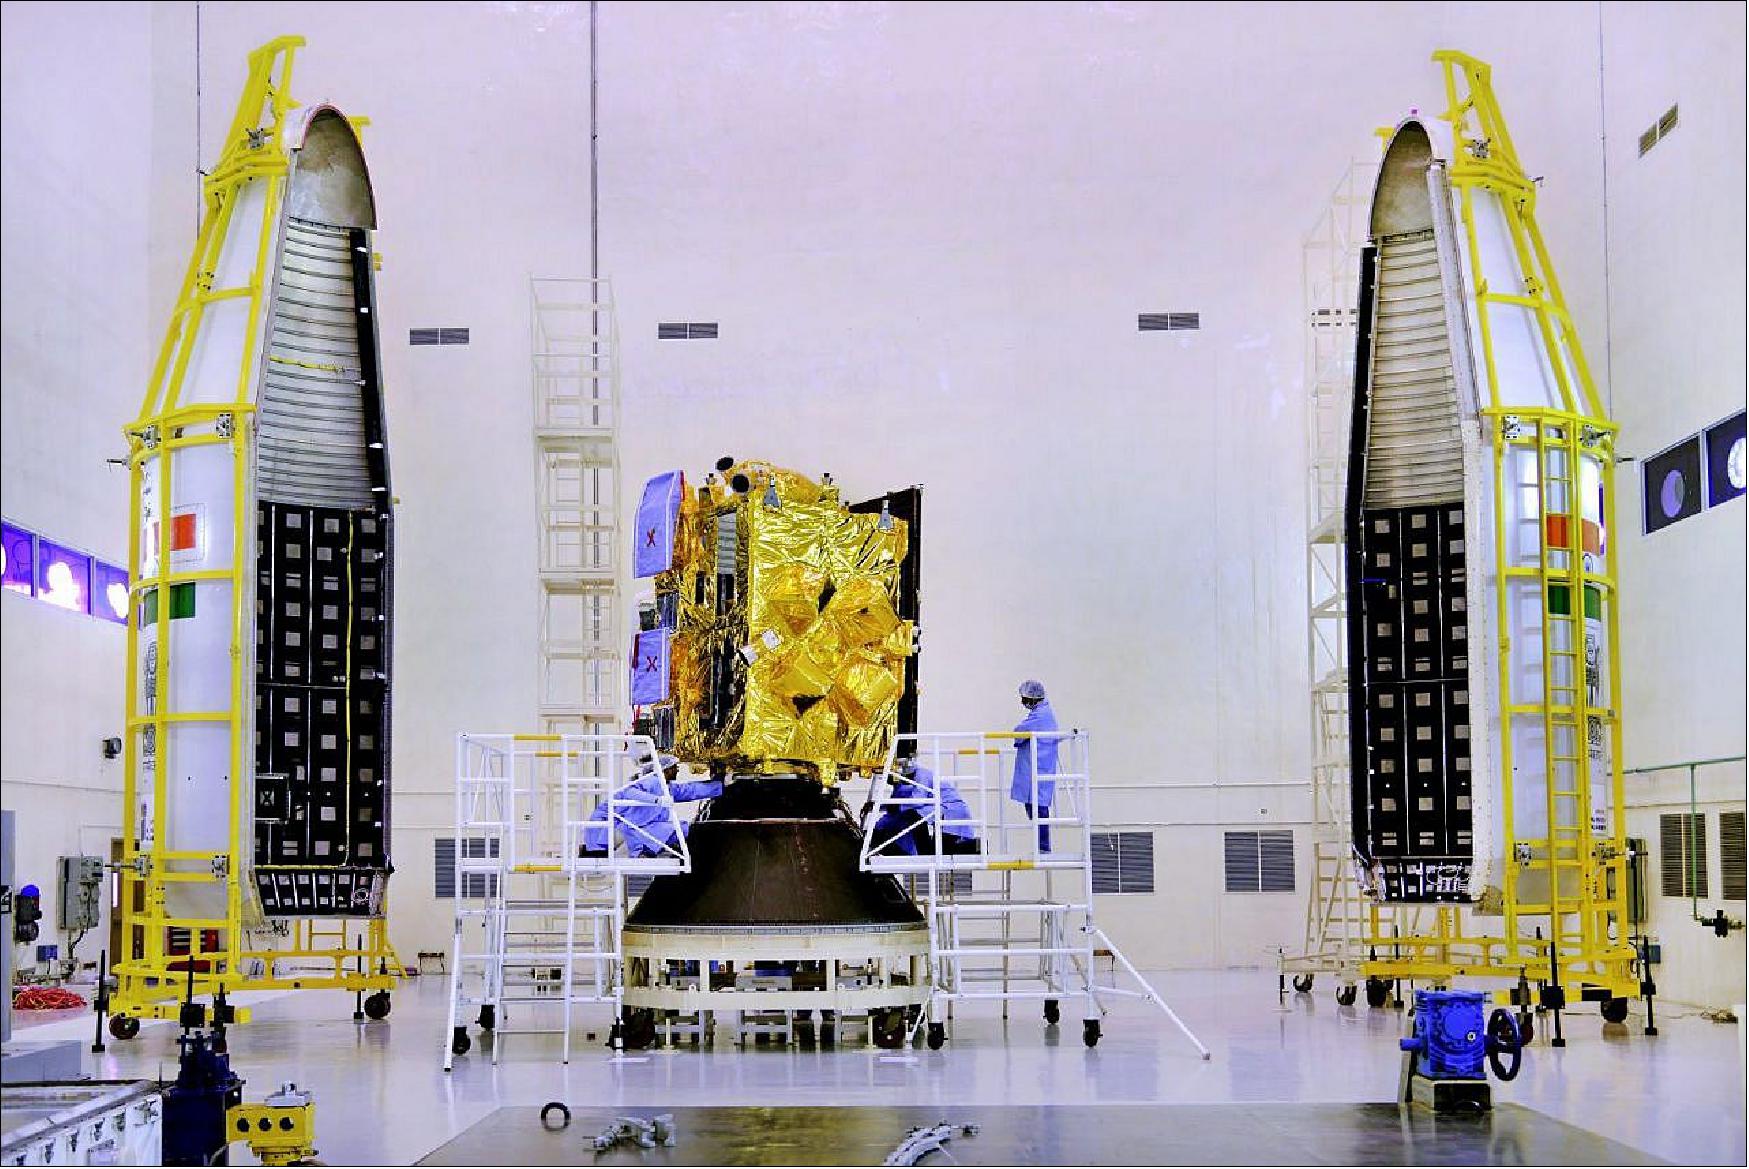 Figure 3: Photo of the INSAT-3DR seen with the two halves of the payload faring of the GSLV-F05 rocket (image credit: ISRO)